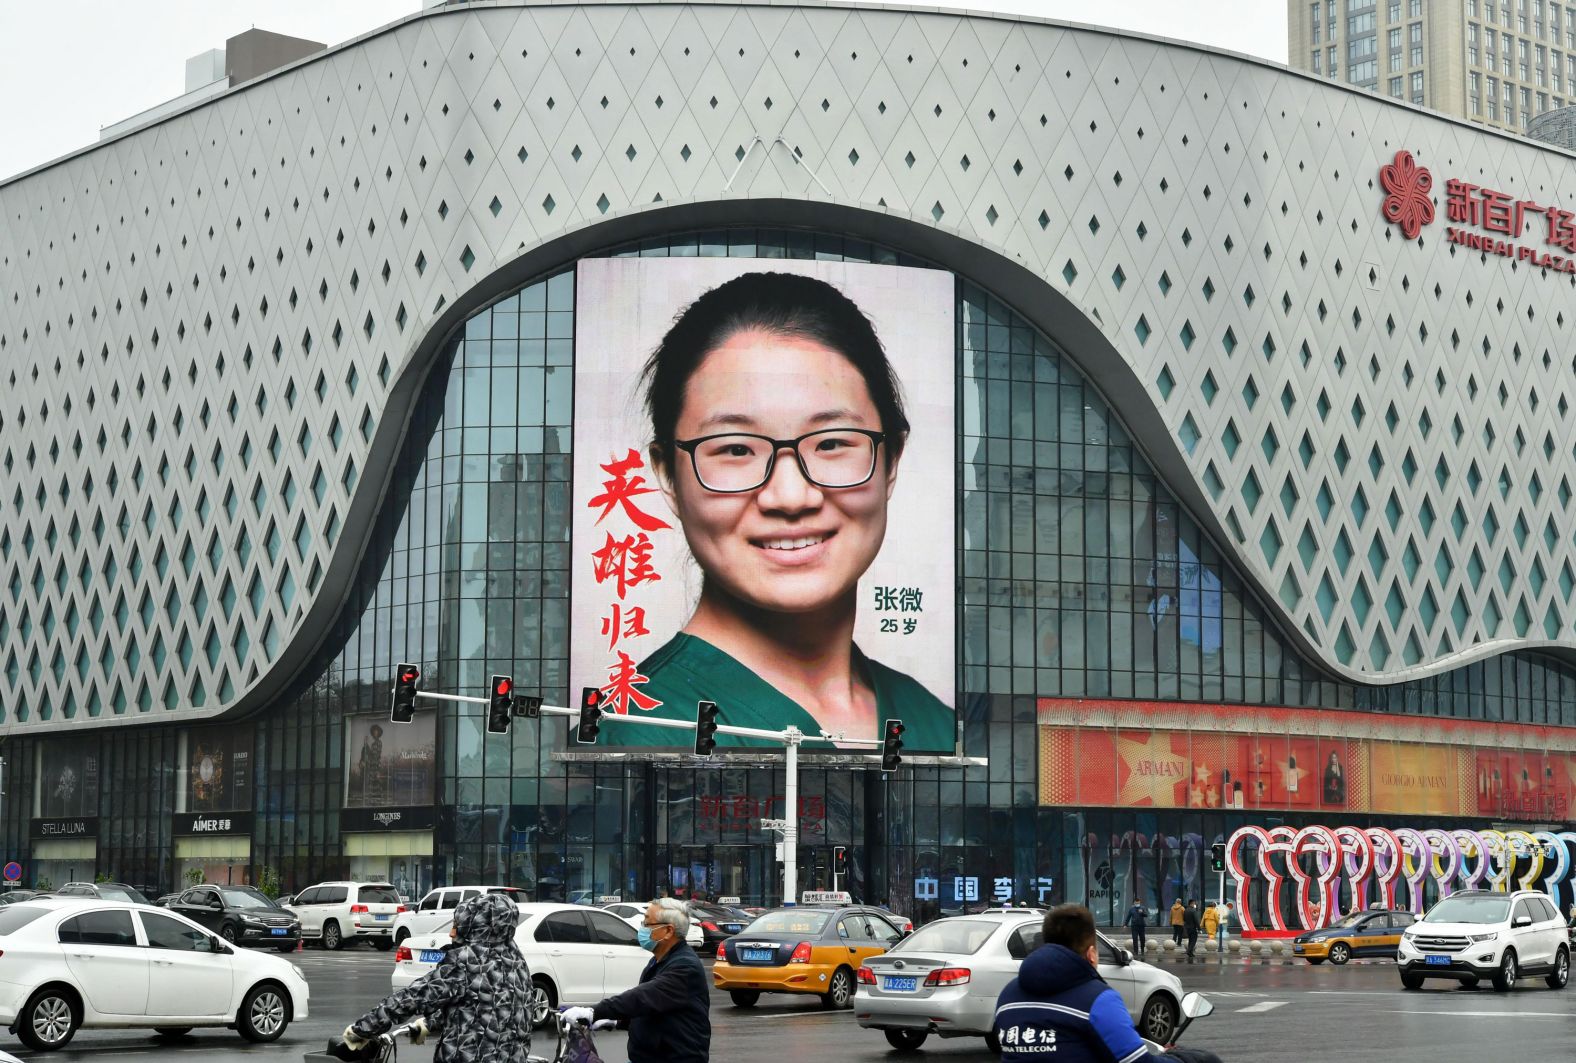 A photo of a medical worker is seen on an outdoor screen in Shijiazhuang, China, on April 1. Medical workers were displayed at the city center to pay tribute to those fighting on the front lines of the pandemic.